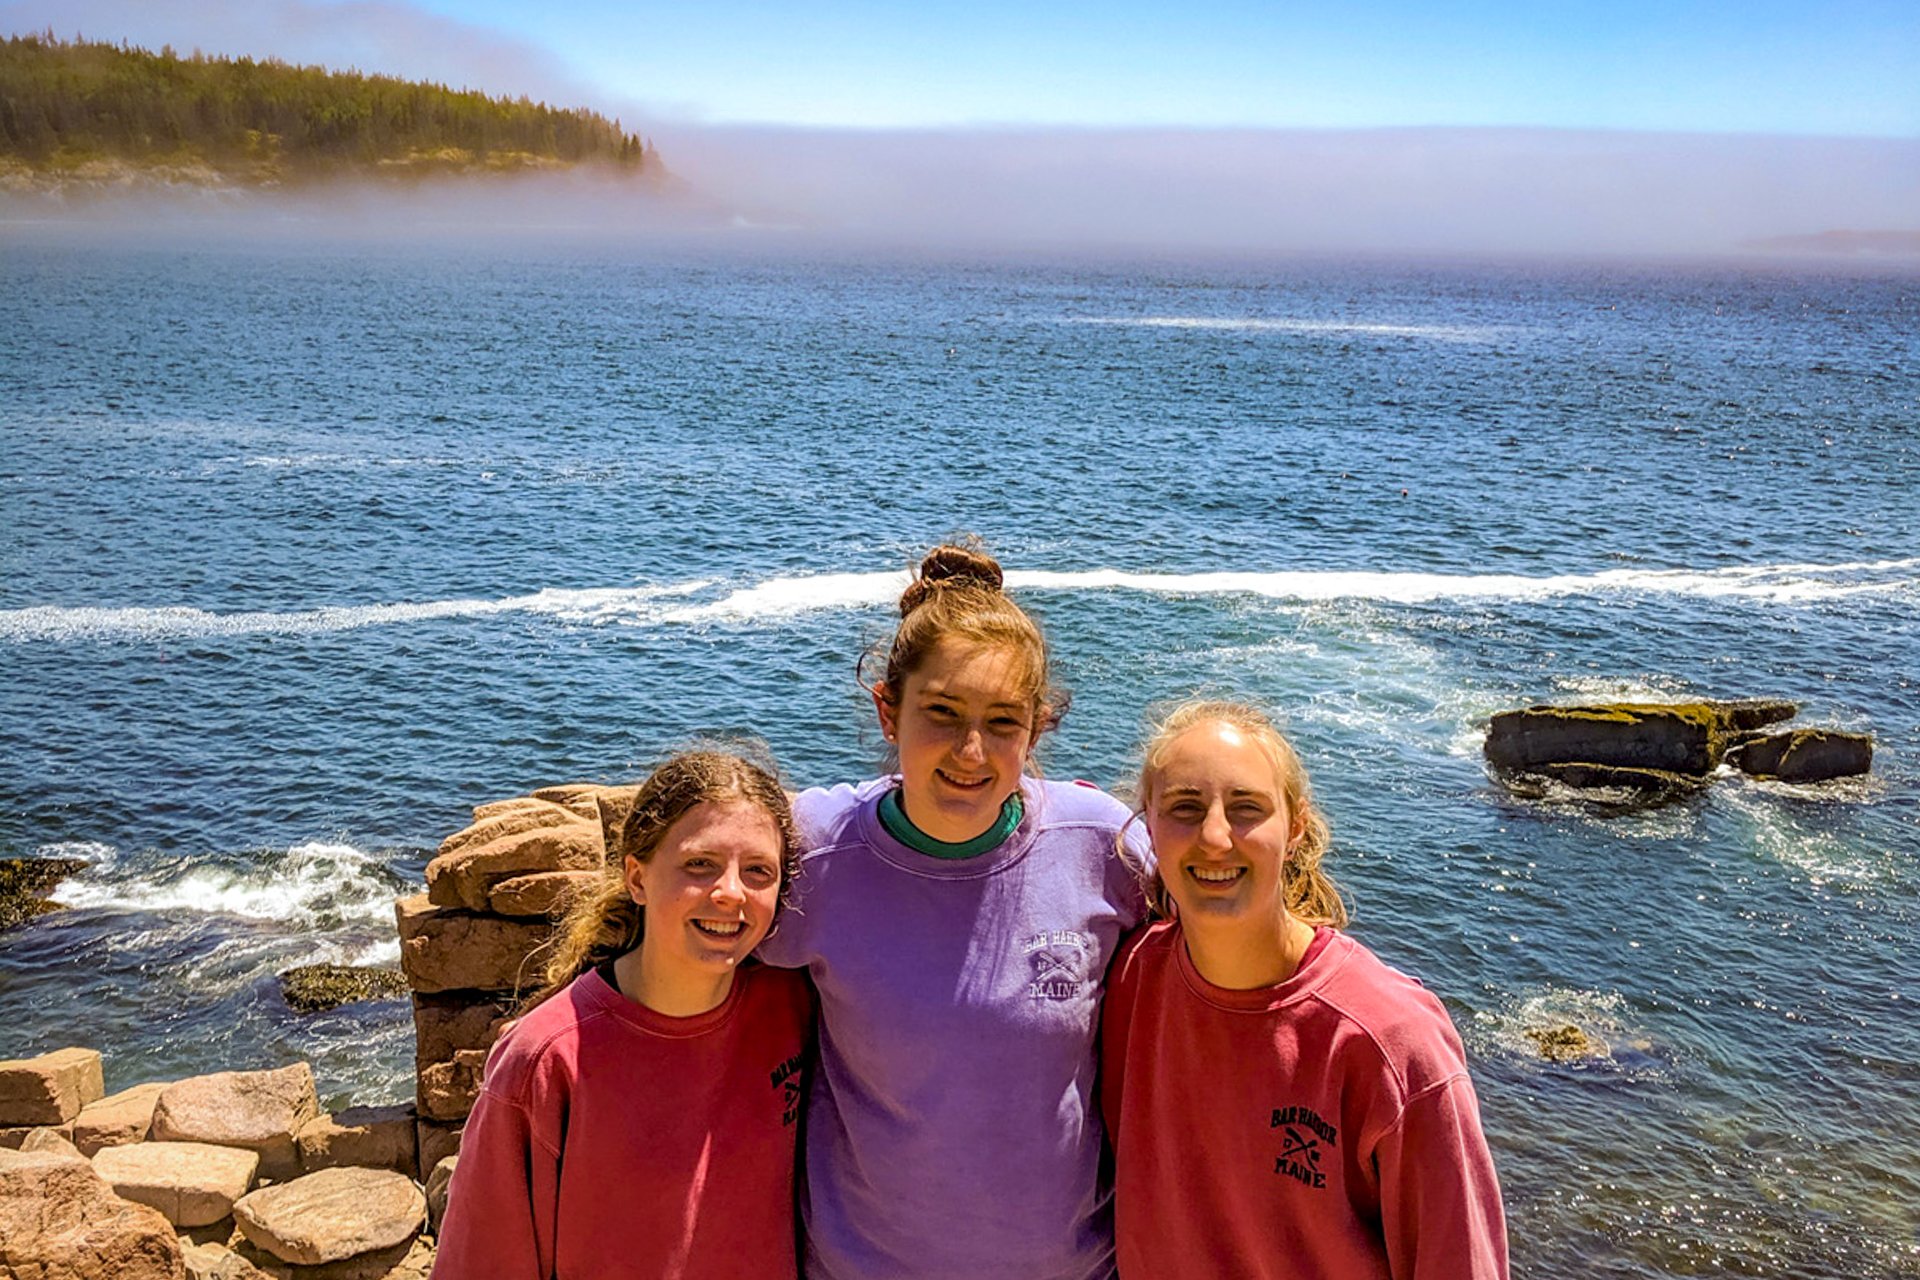 Three teen girls pose in front of a rocky shoreline overlooking the ocean, somewhere along Maine's rugged coast